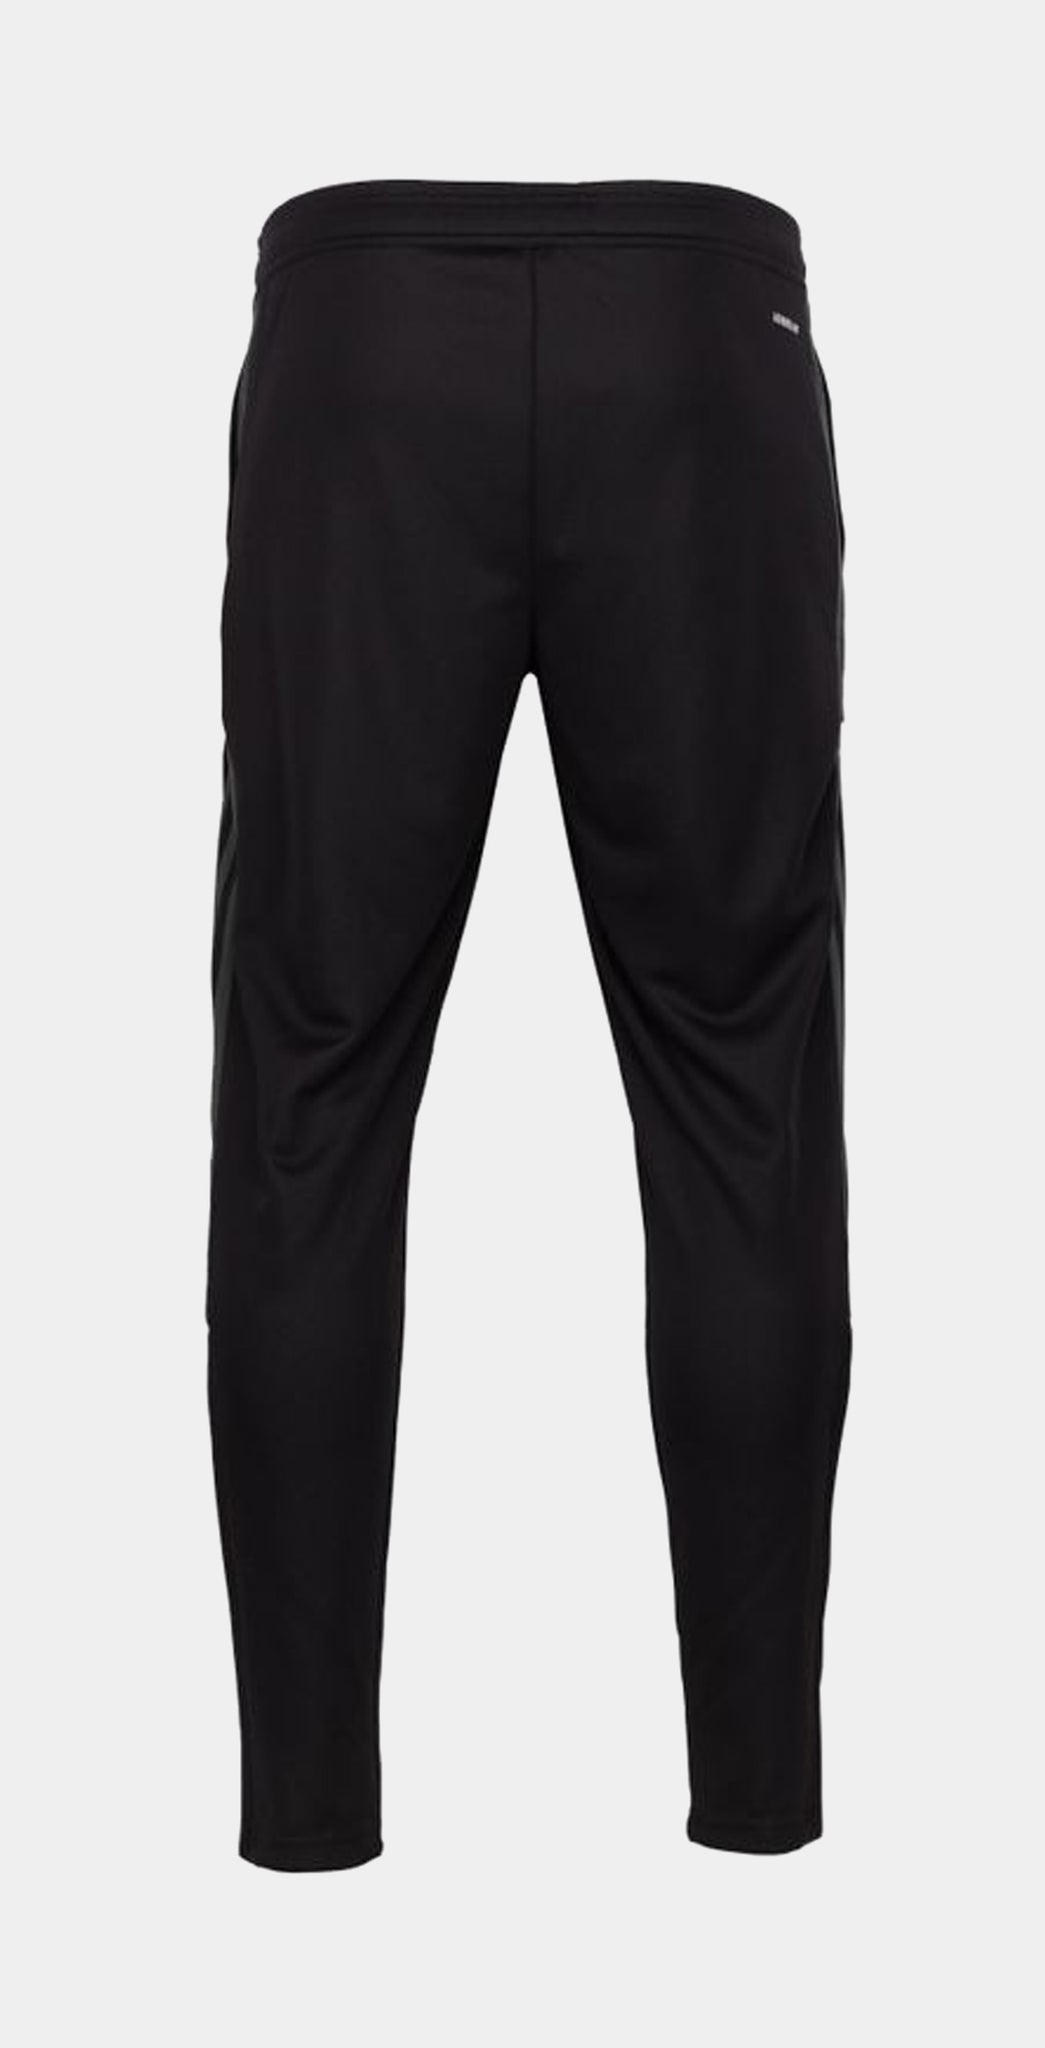 Buy Blue Track Pants for Men by ADIDAS Online | Ajio.com